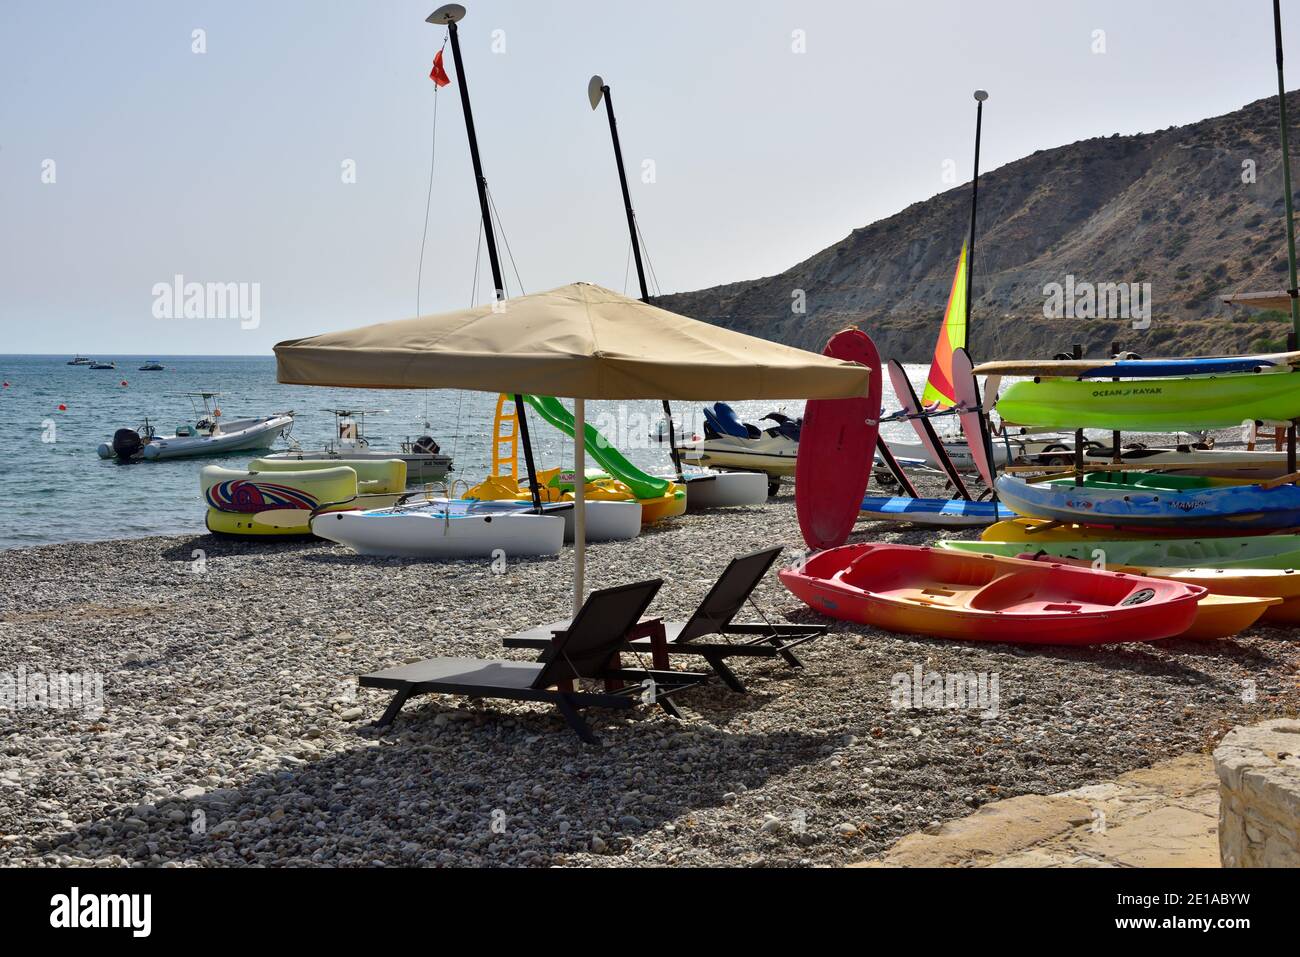 Beach with various water sports boats for hire (Columbia Water Sports (Yiannos & Dia)) at Pissouri Bay, Cyprus Stock Photo